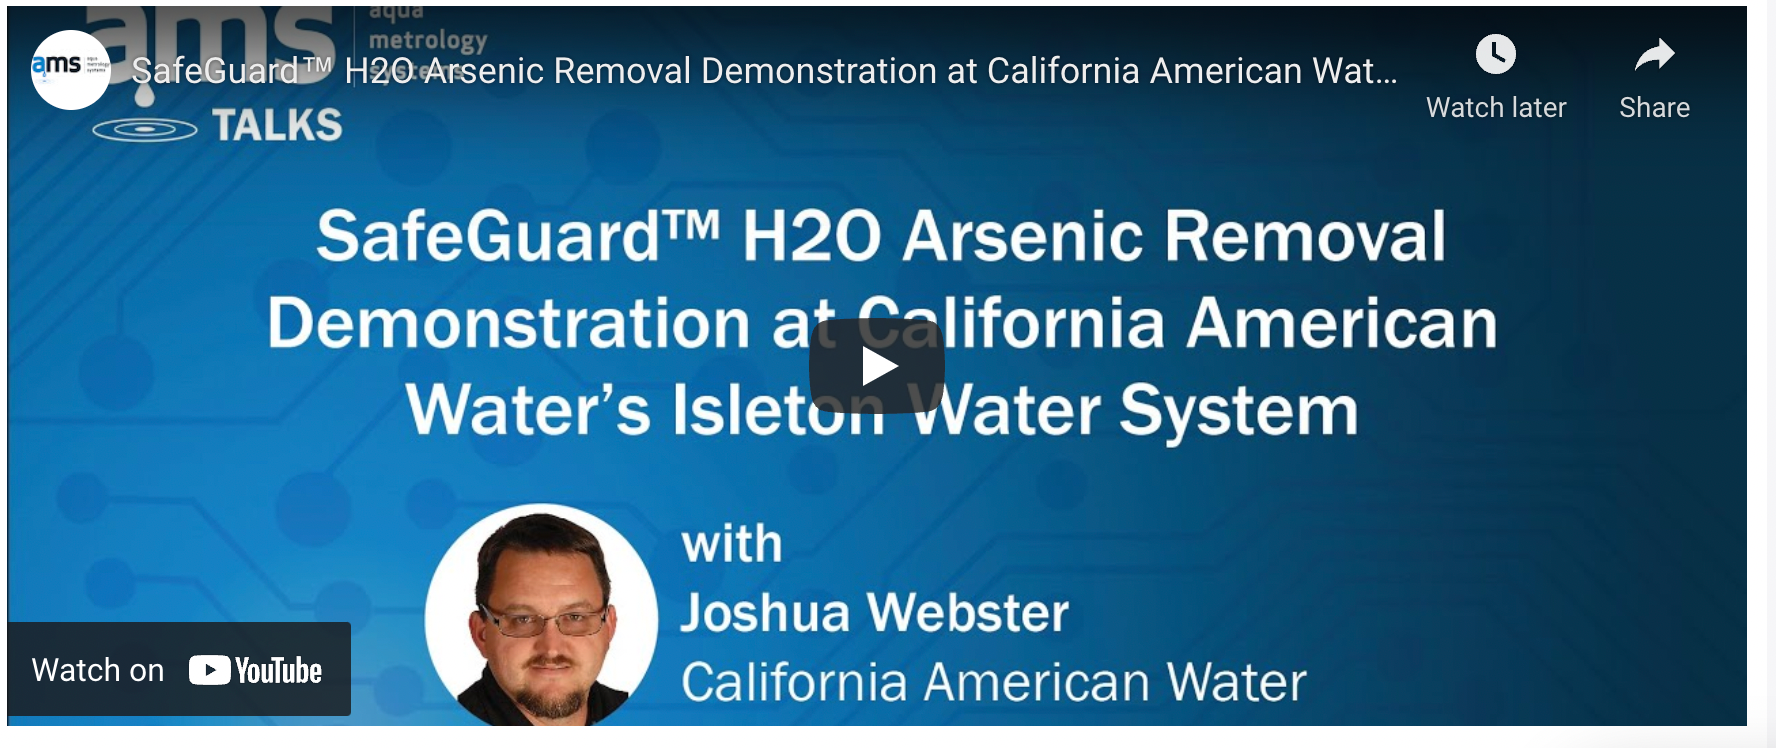 SafeGuard™ H2O Arsenic Removal Demonstration at California American Water’s Isleton Water System